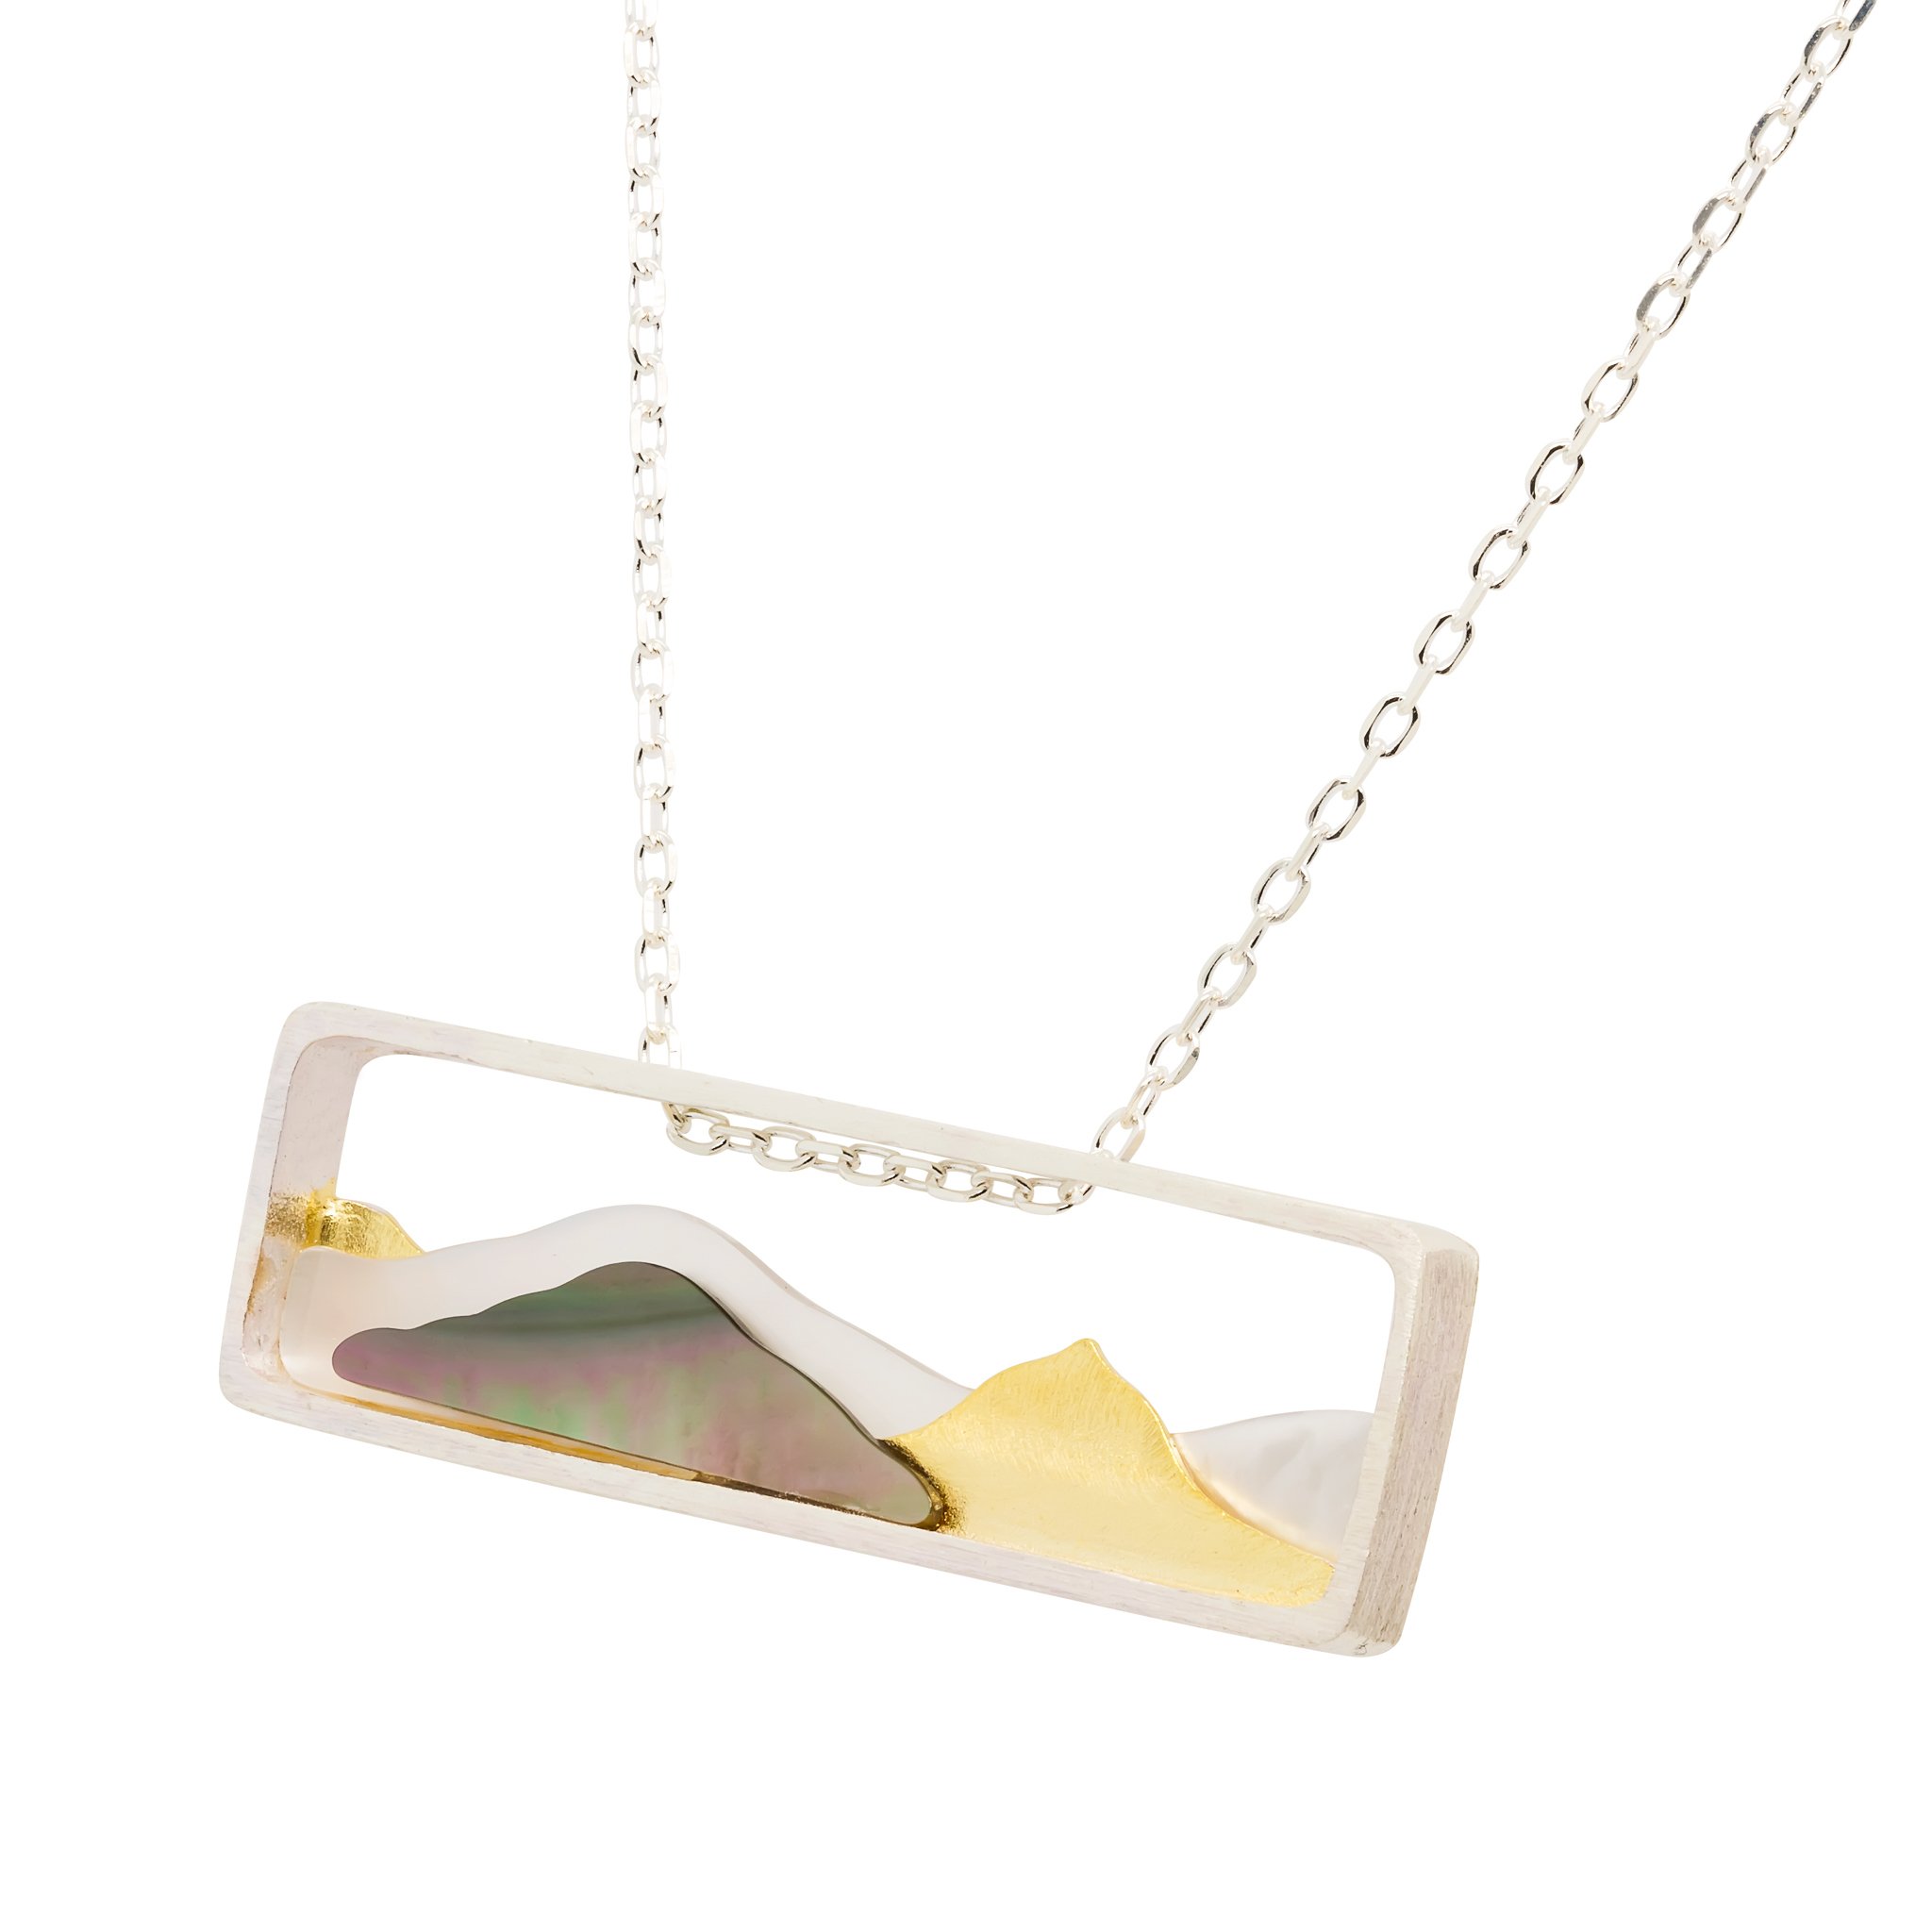 Mother of Pearl and Abalone Silver Peaks Necklace